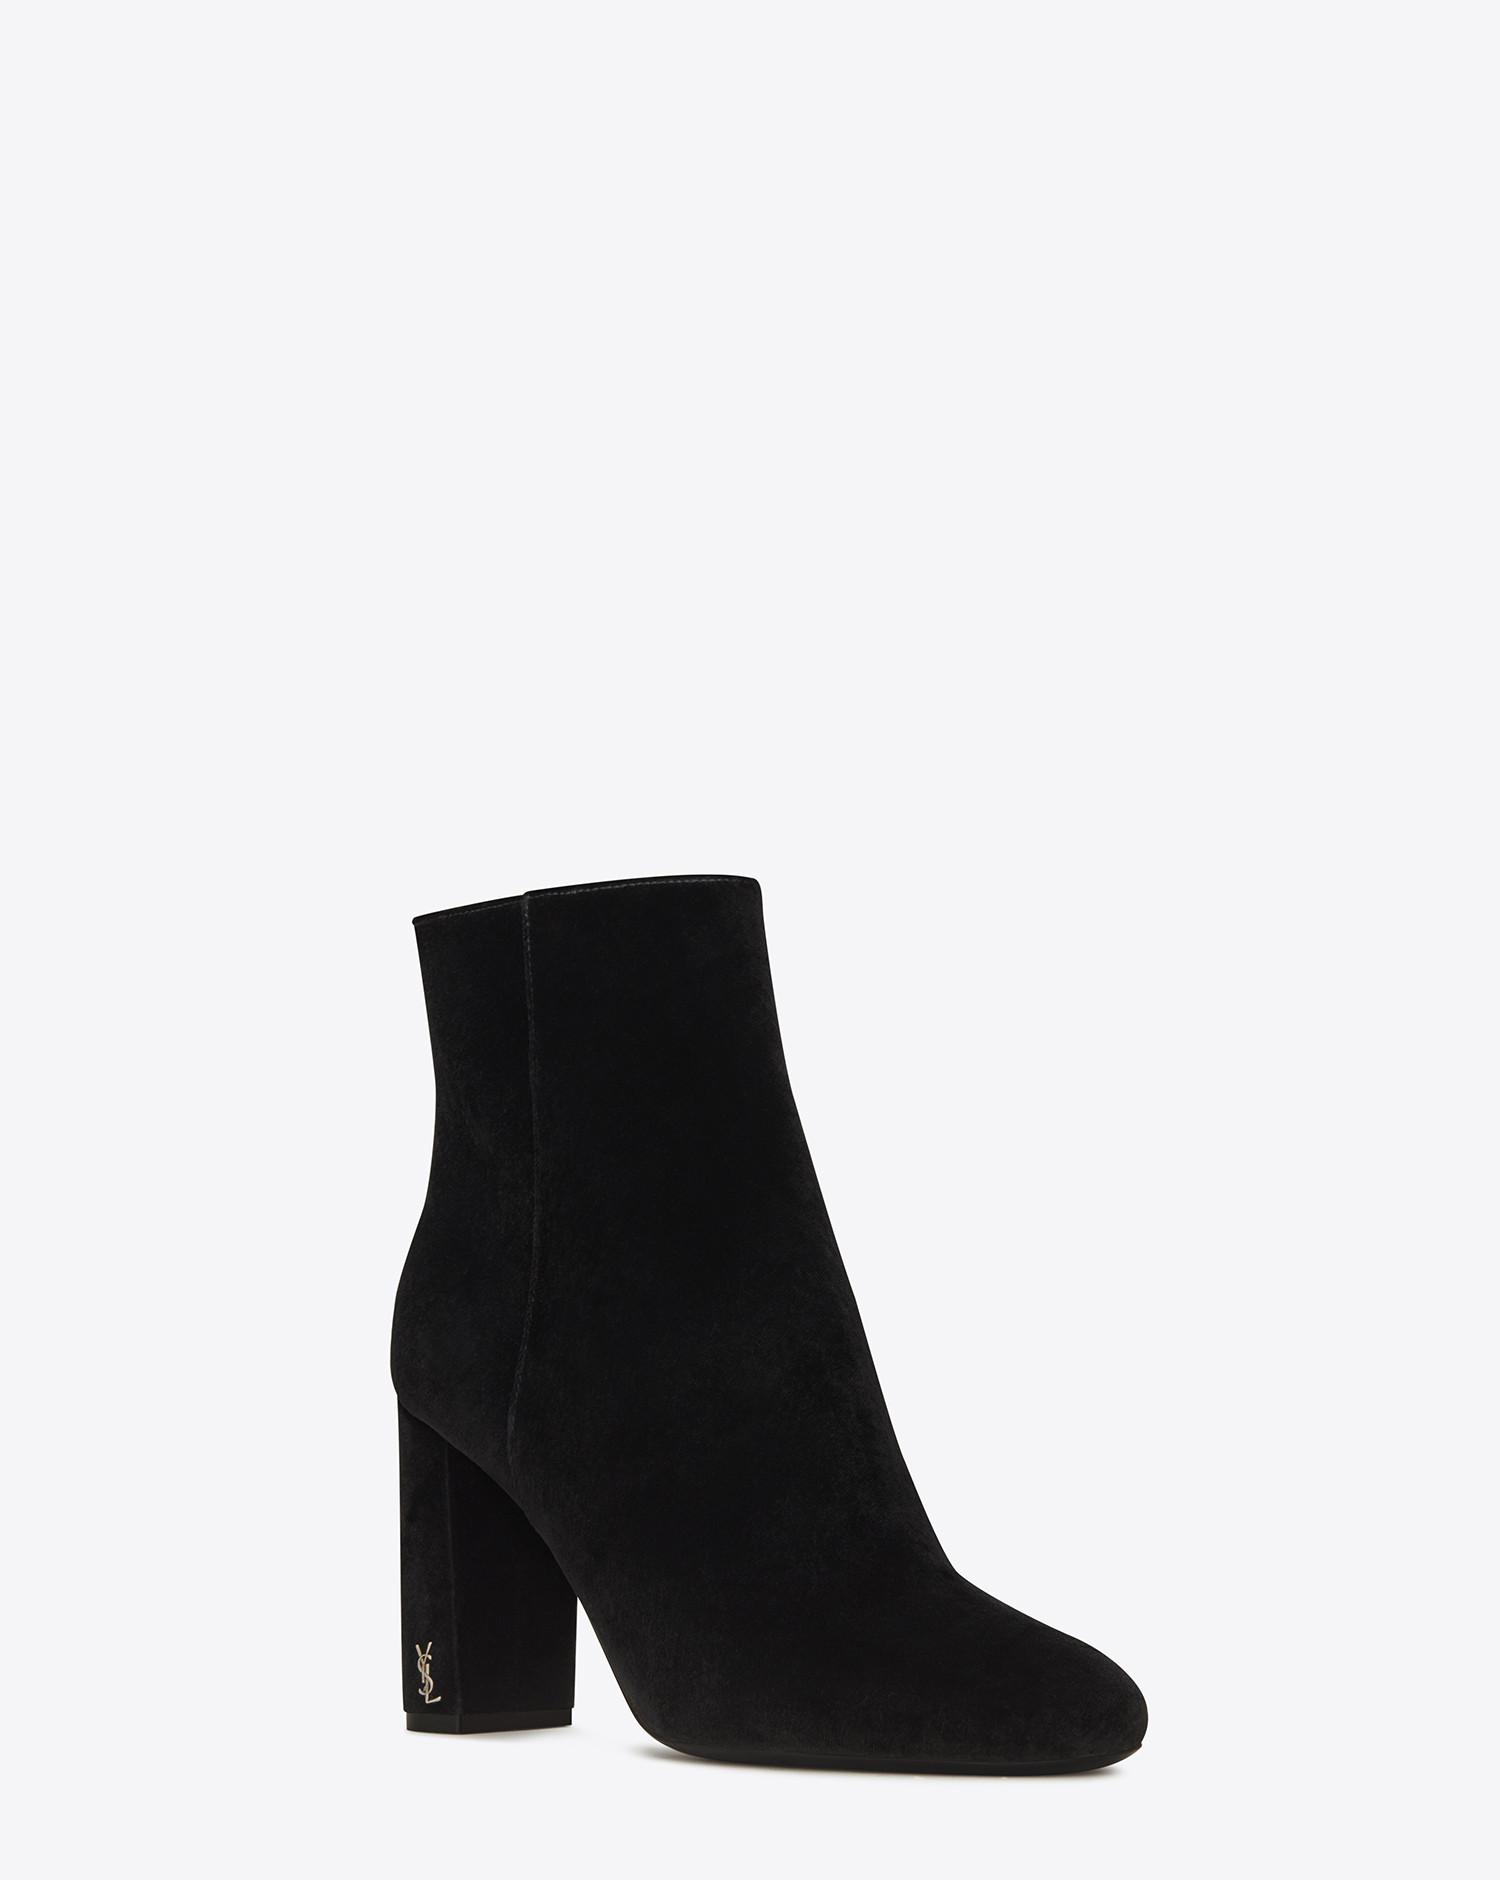 Saint Laurent Leather Loulou 95 Ankle Boots in Black - Lyst